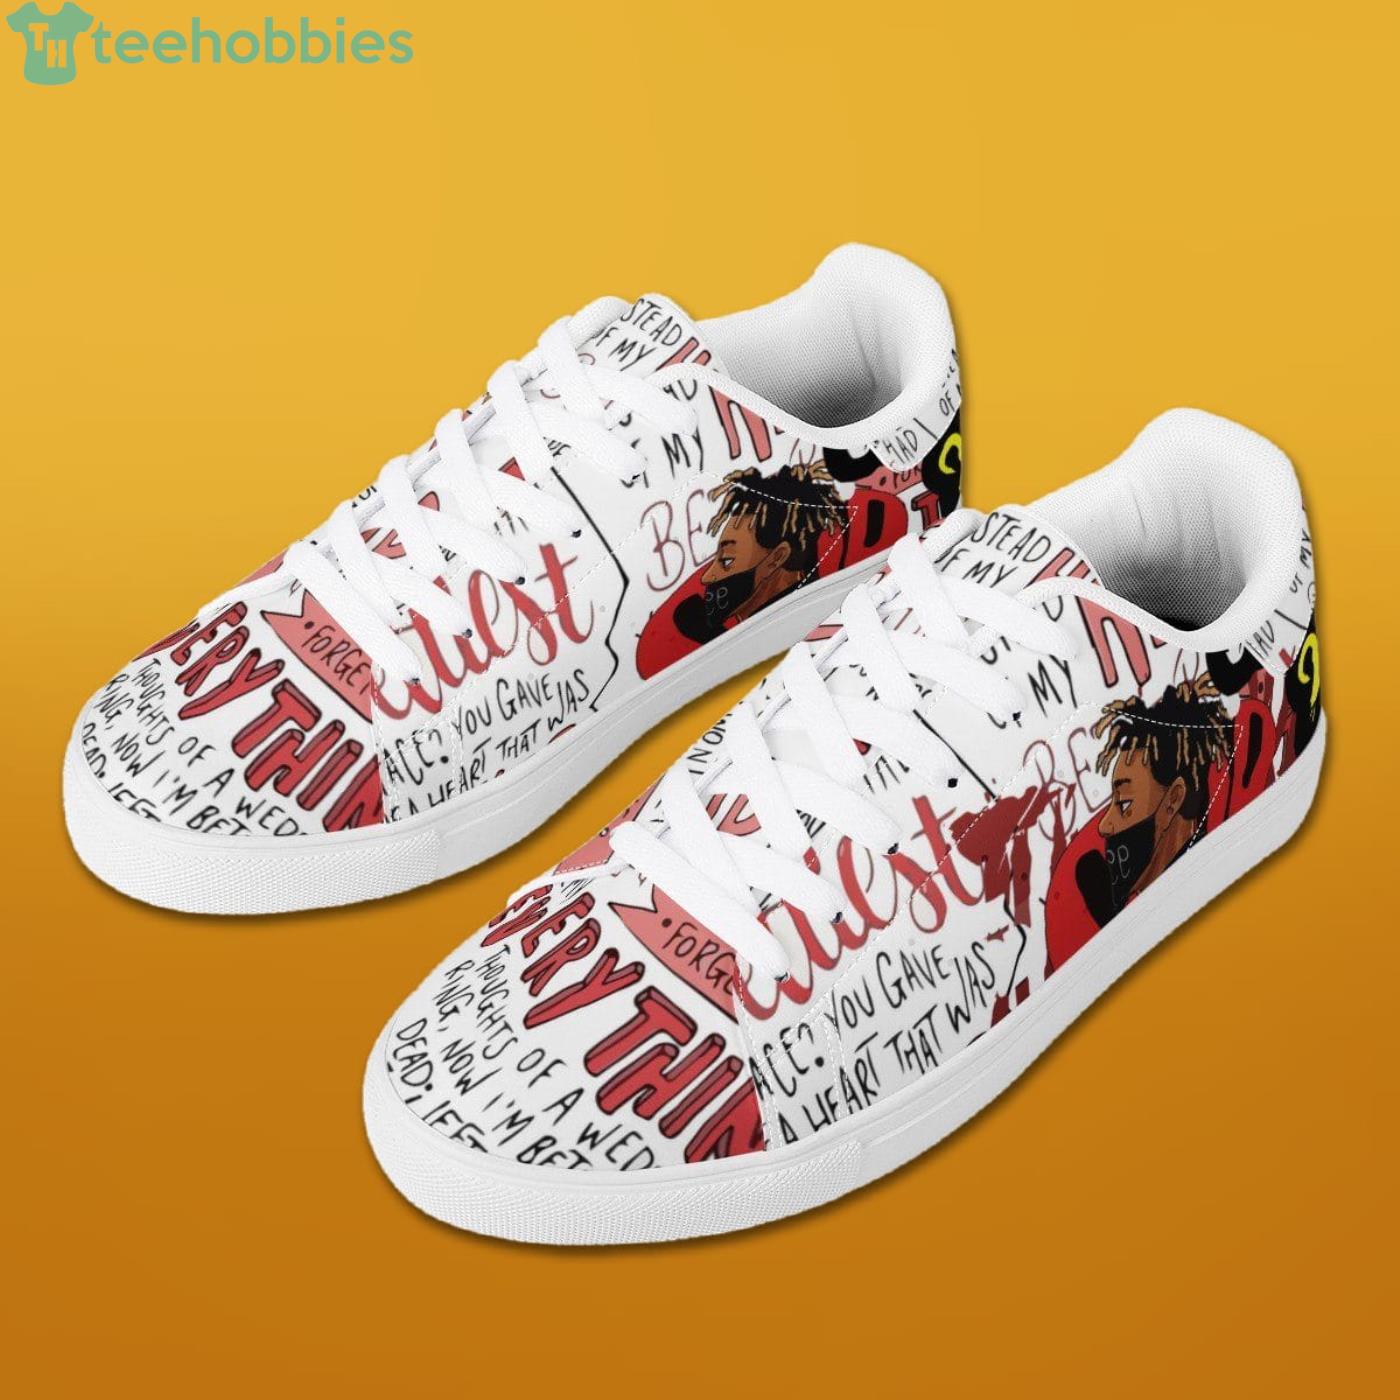 Running Sneakers Juice Wrld 999 Red Black Yeezy Shoes For Men And